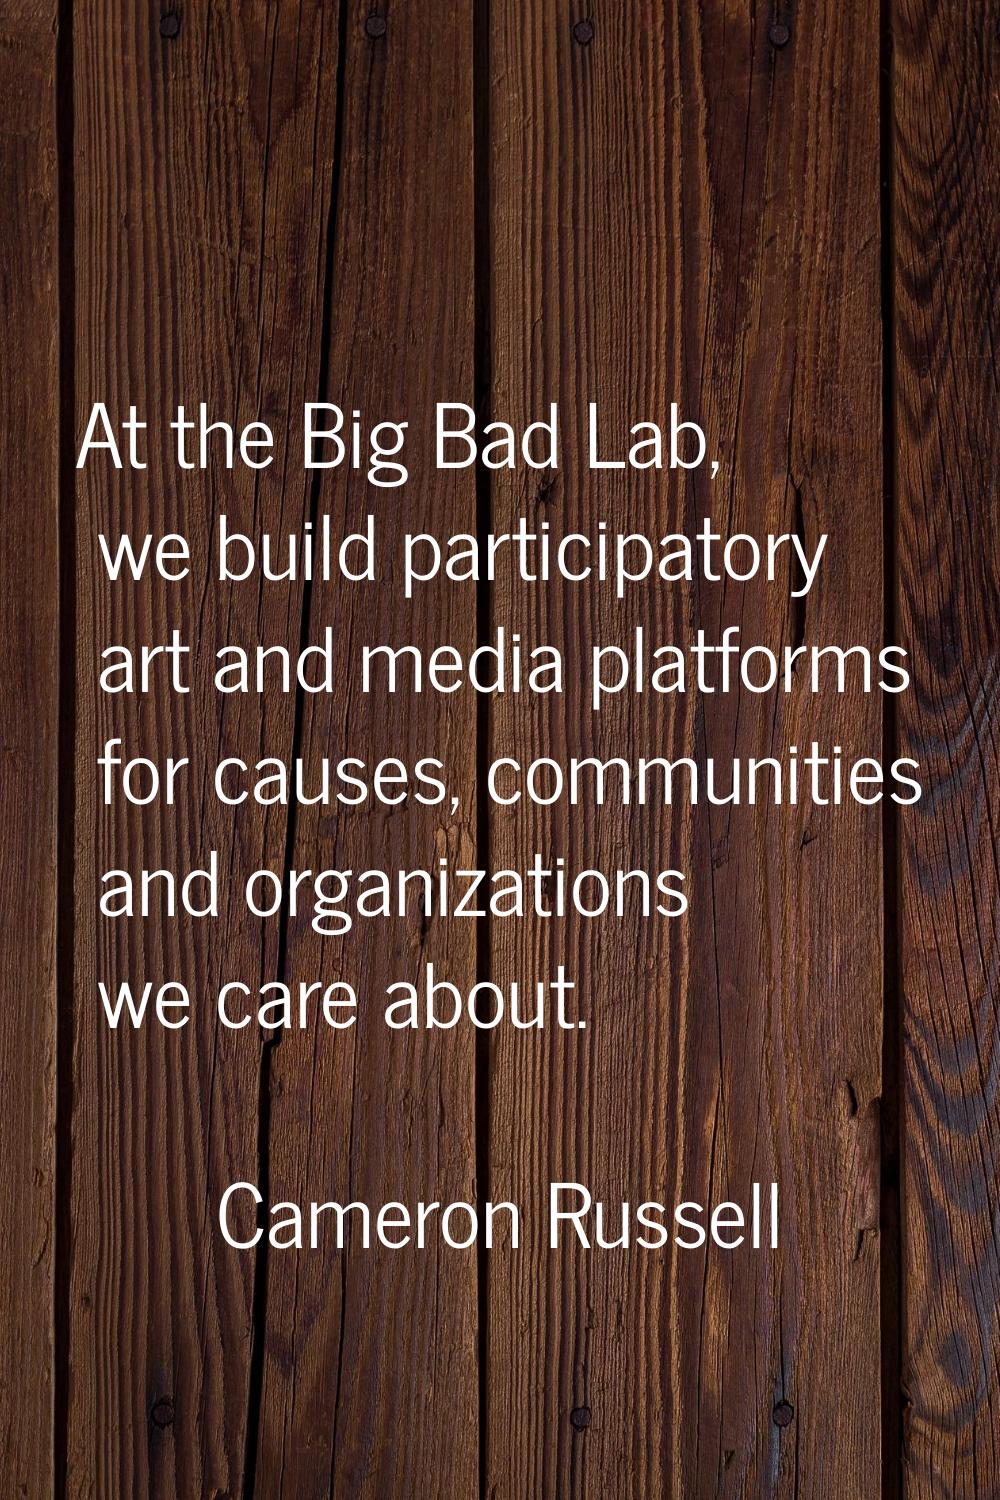 At the Big Bad Lab, we build participatory art and media platforms for causes, communities and orga